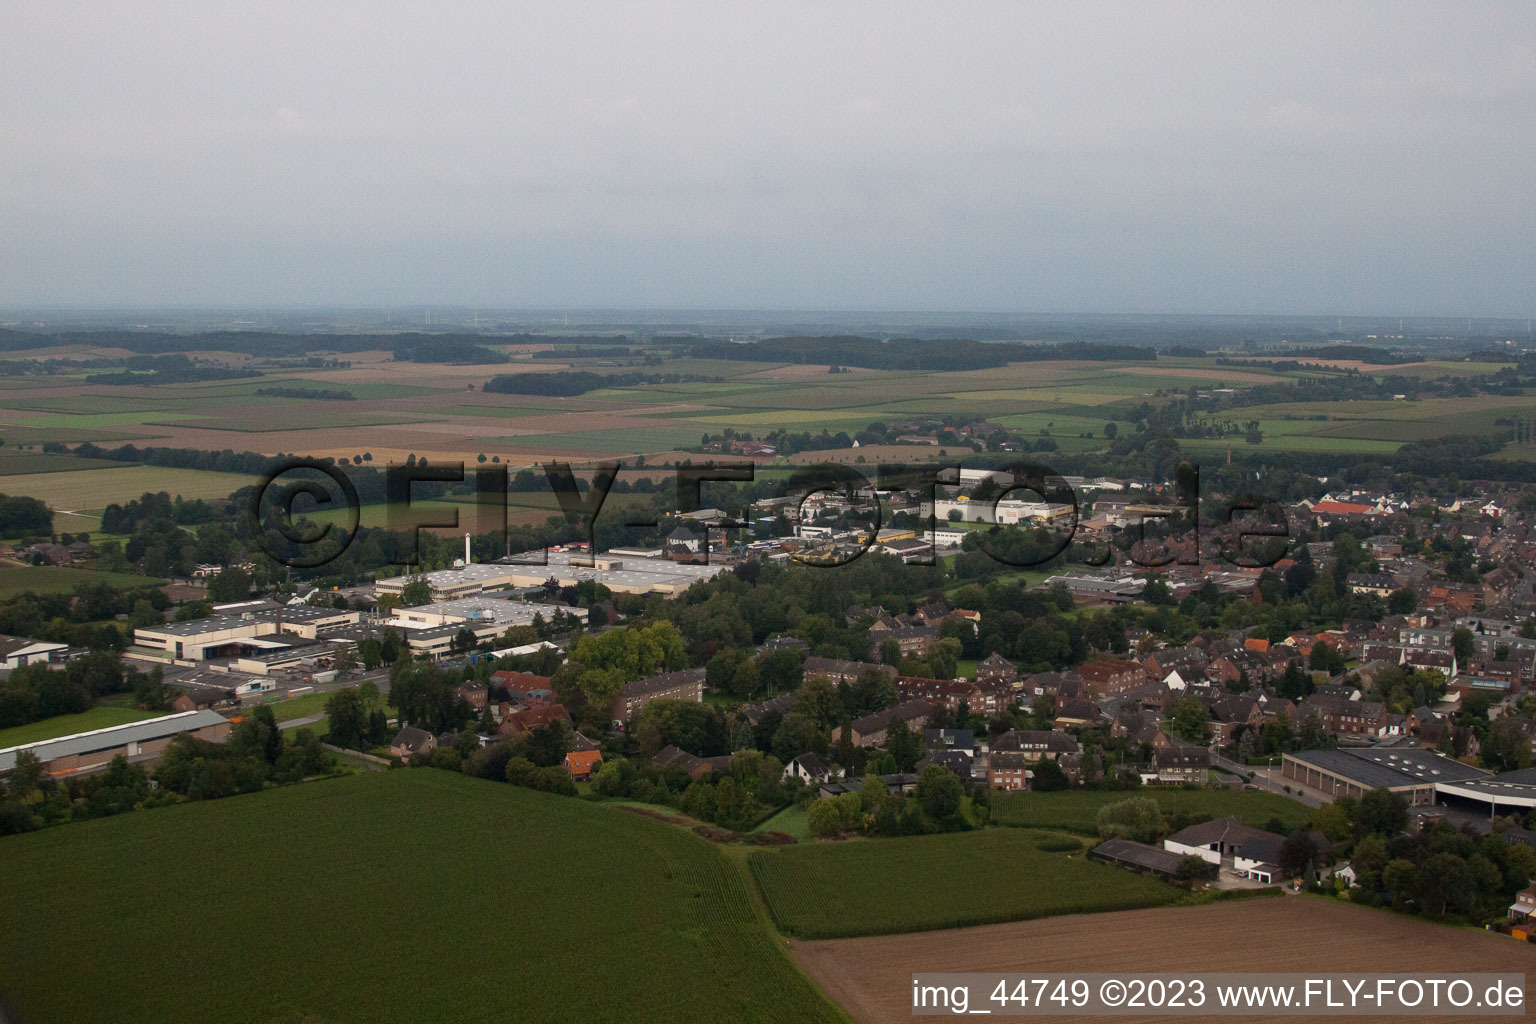 Oblique view of Grefrath in the state North Rhine-Westphalia, Germany